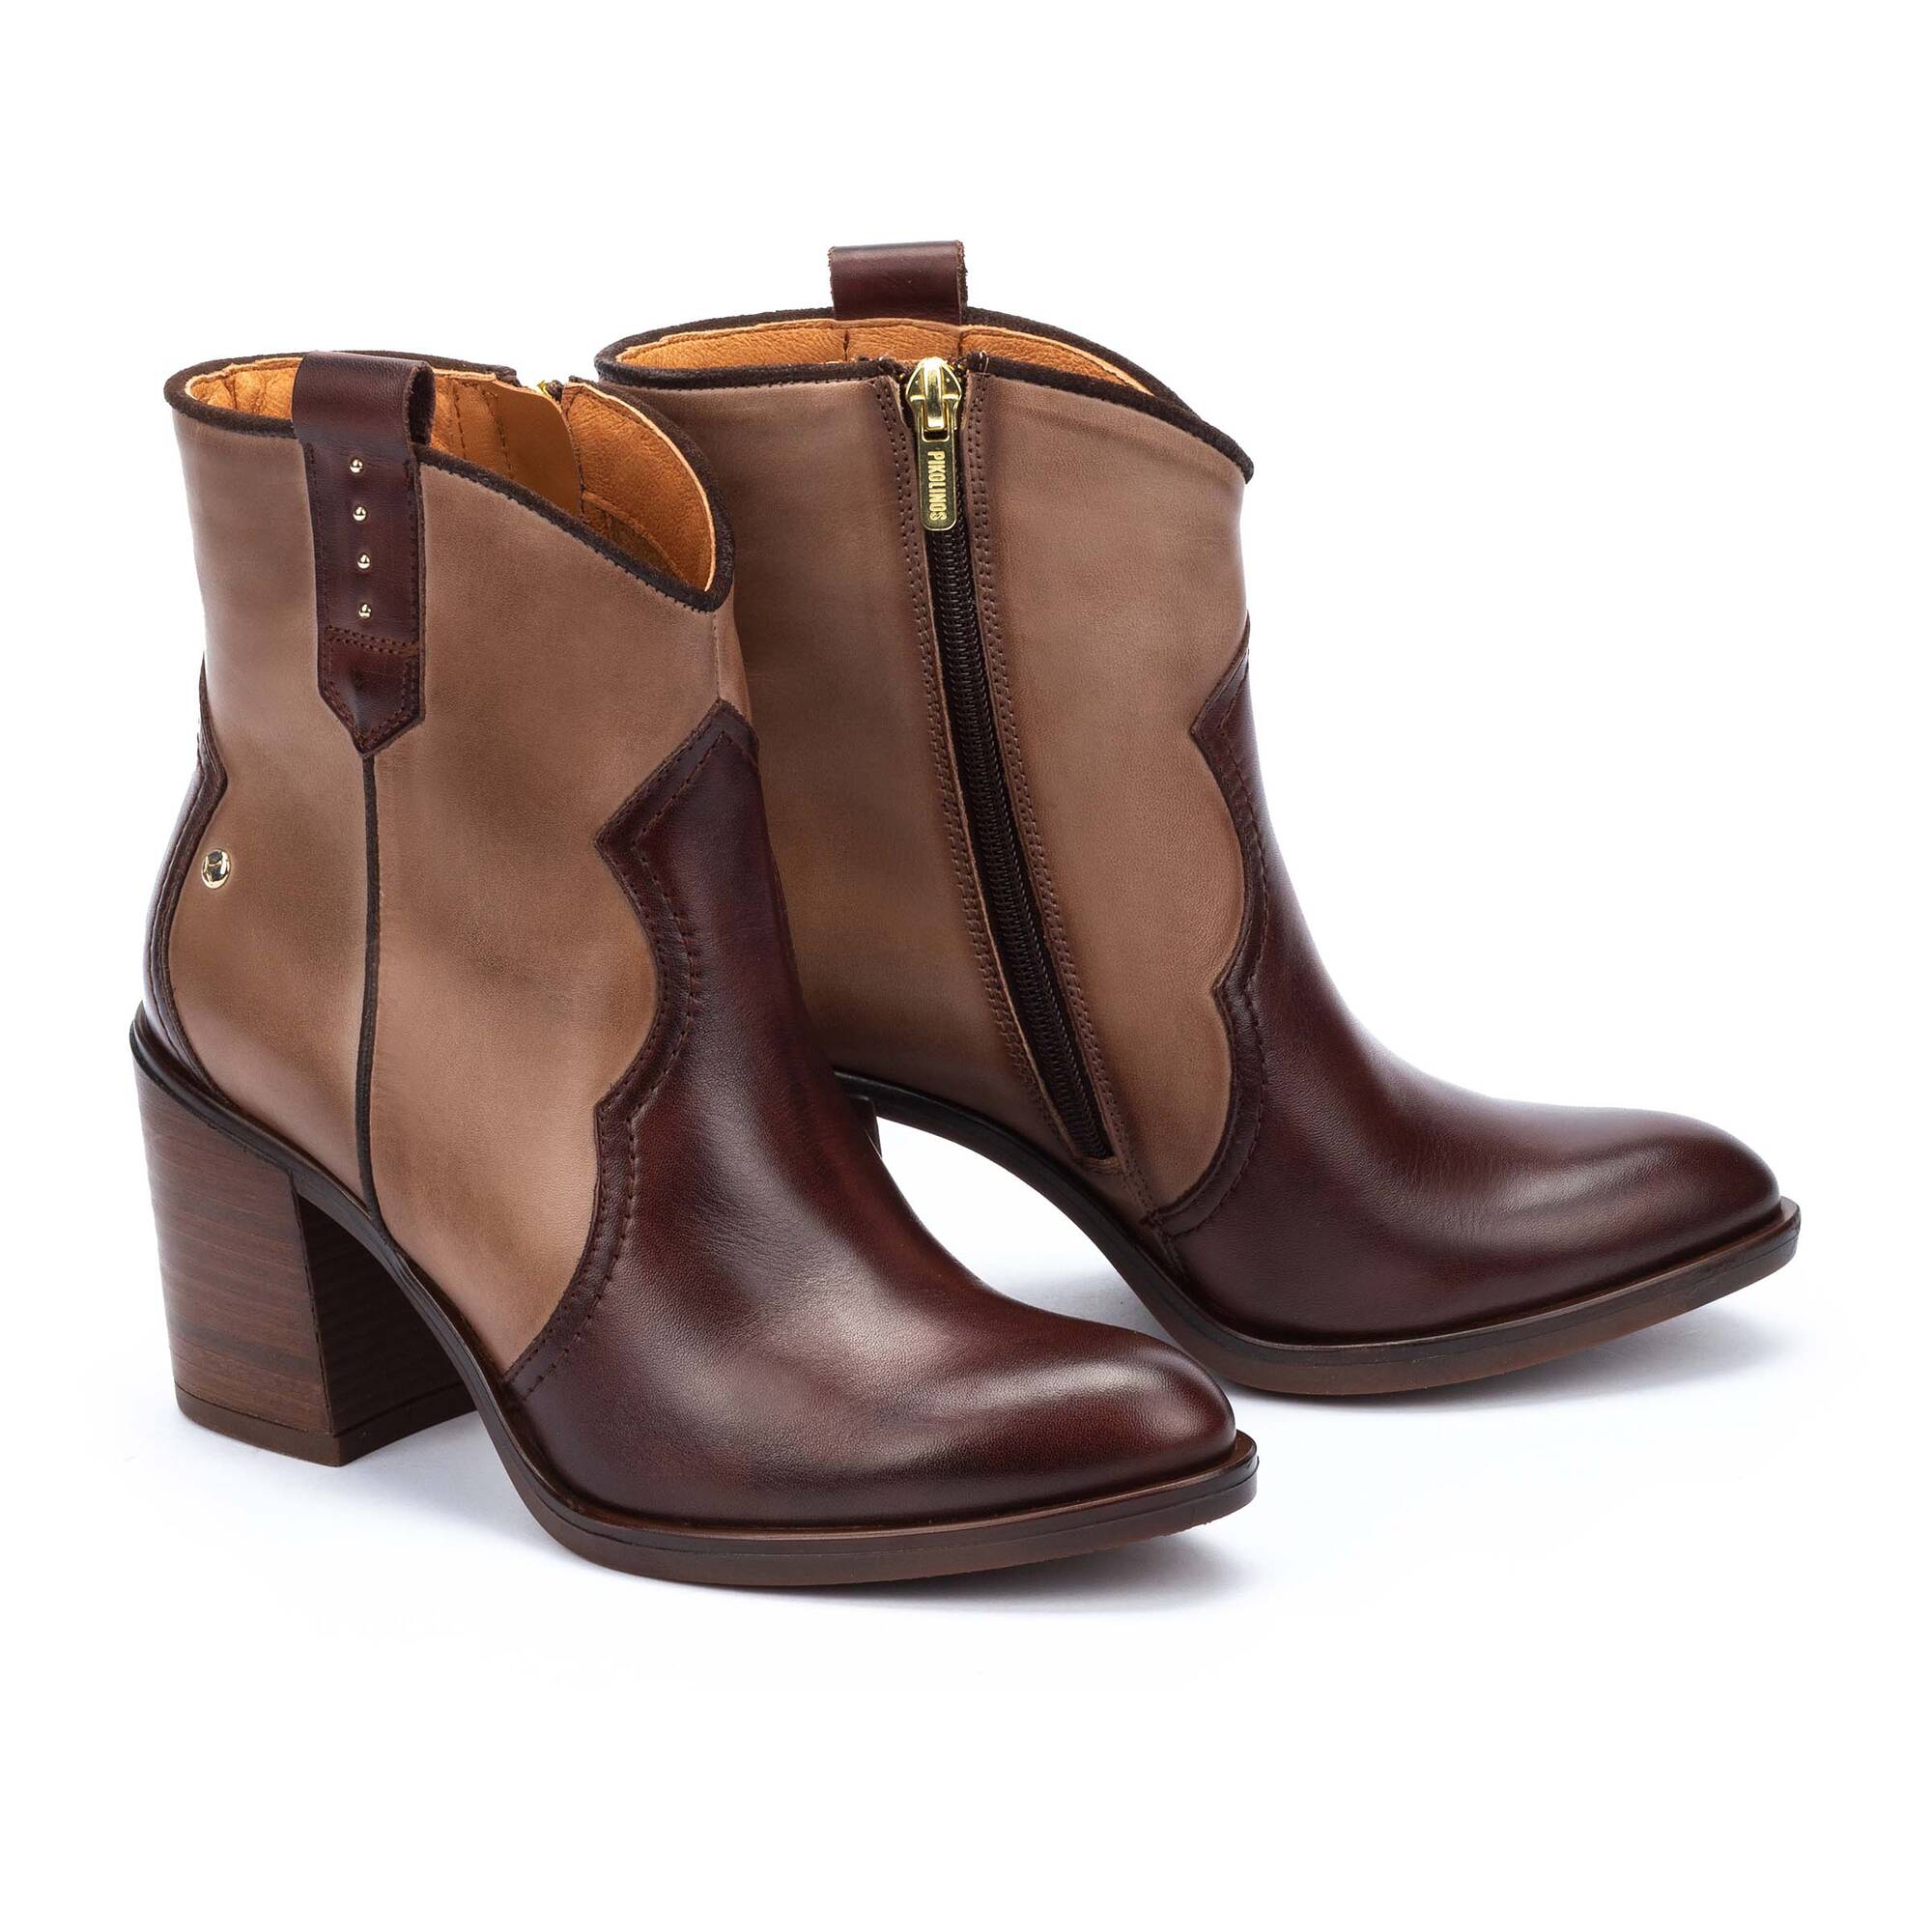 Ankle boots | RIOJA W7Y-8957TLC1, CAOBA, large image number 100 | null